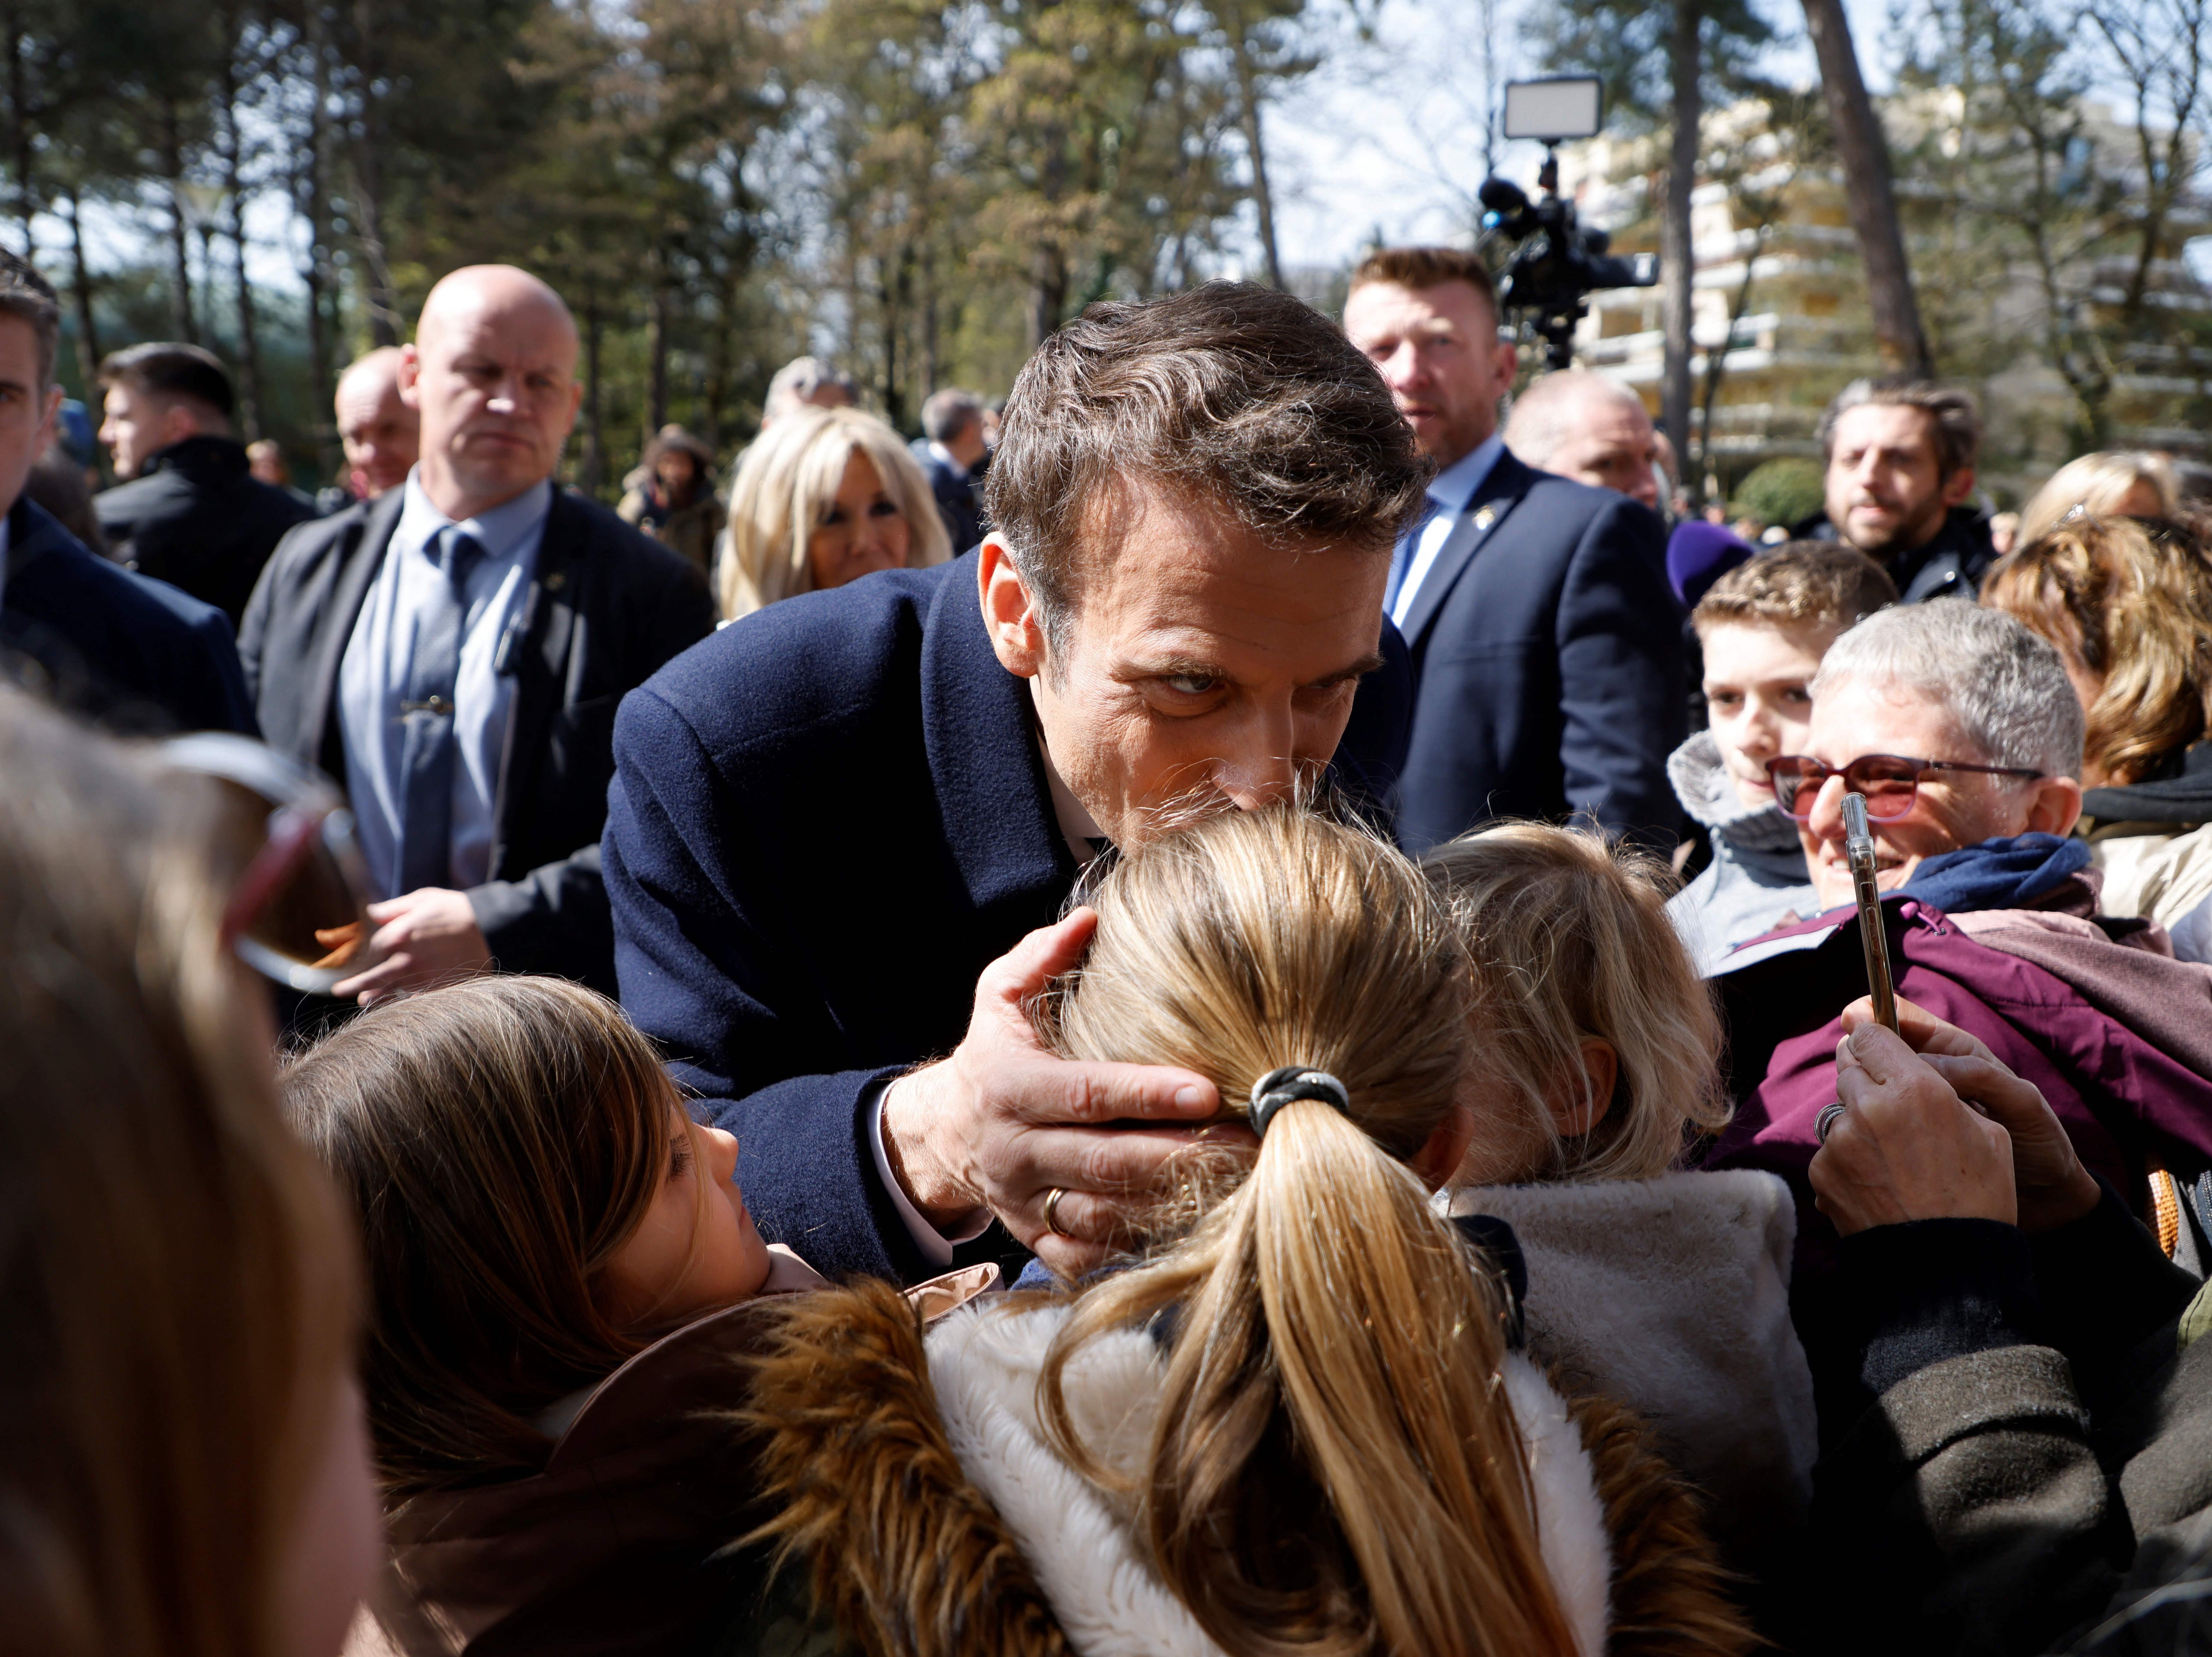 Emmanuel Macron kisses a young child on the head as he speaks with onlookers after casting his ballot in Le Touquet